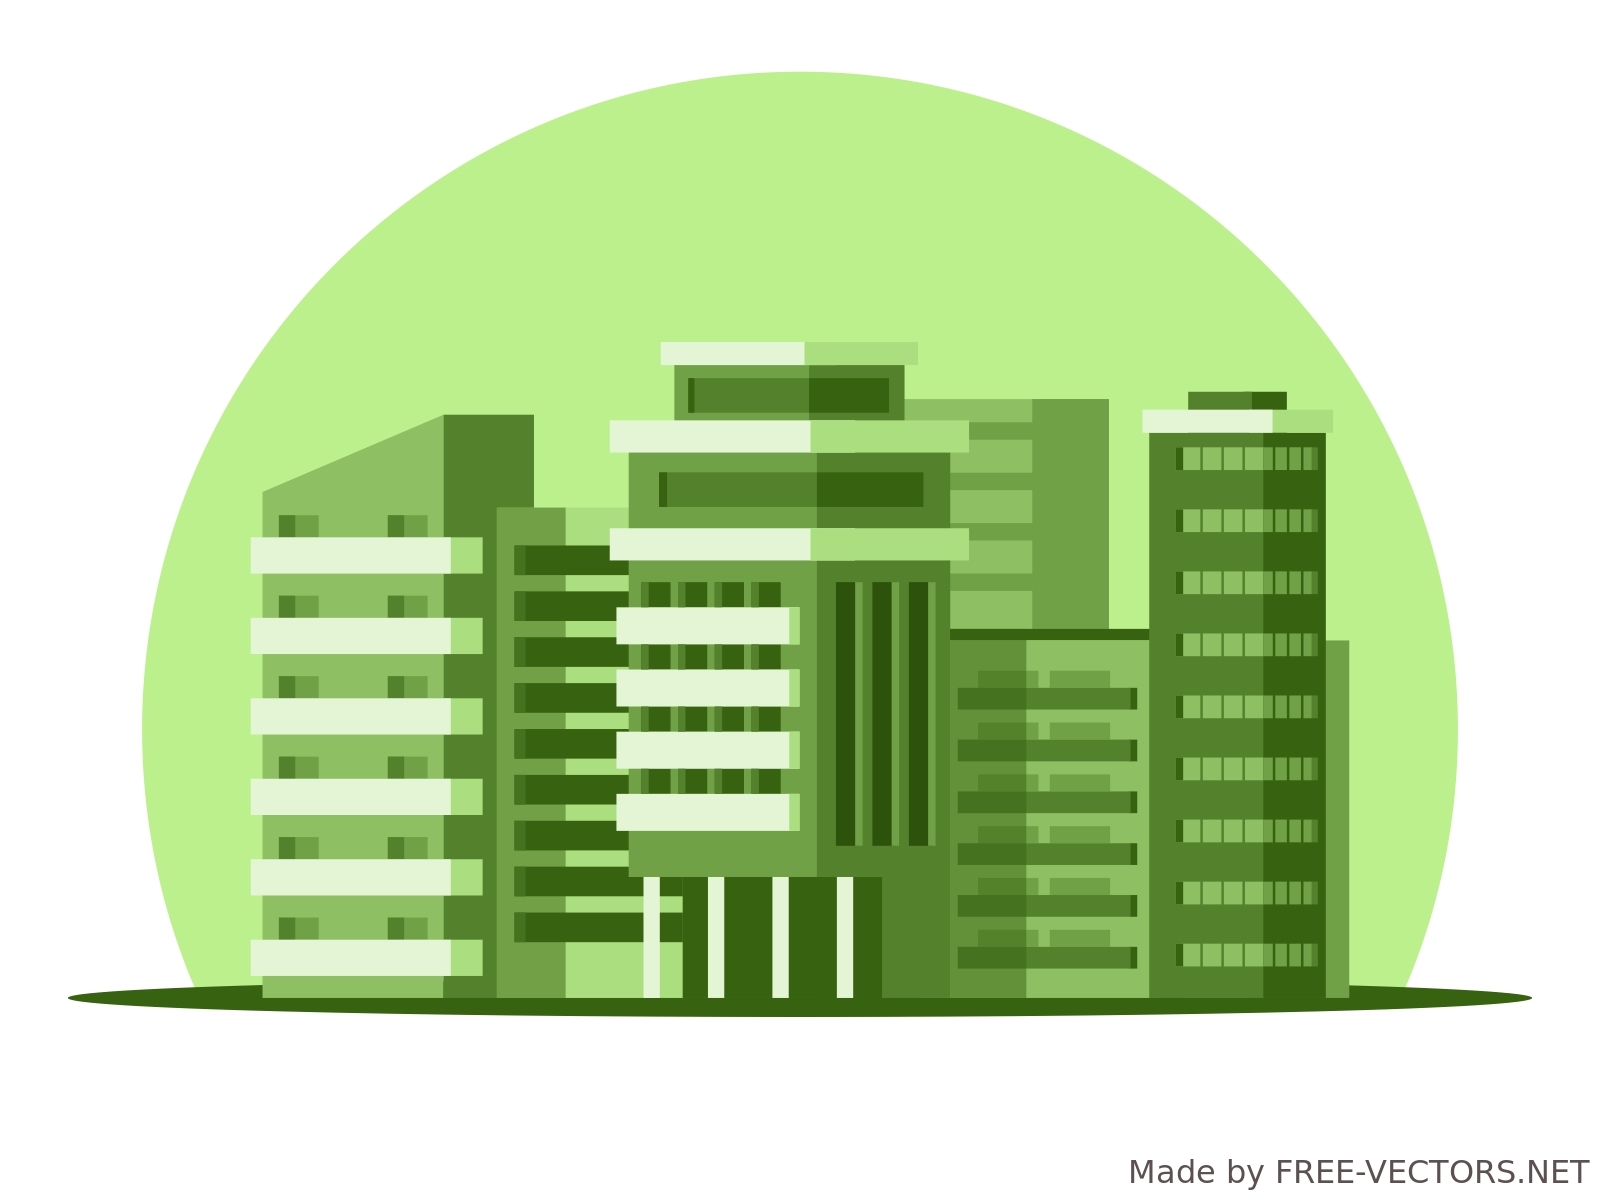 Illustration of skyline with a green overlay